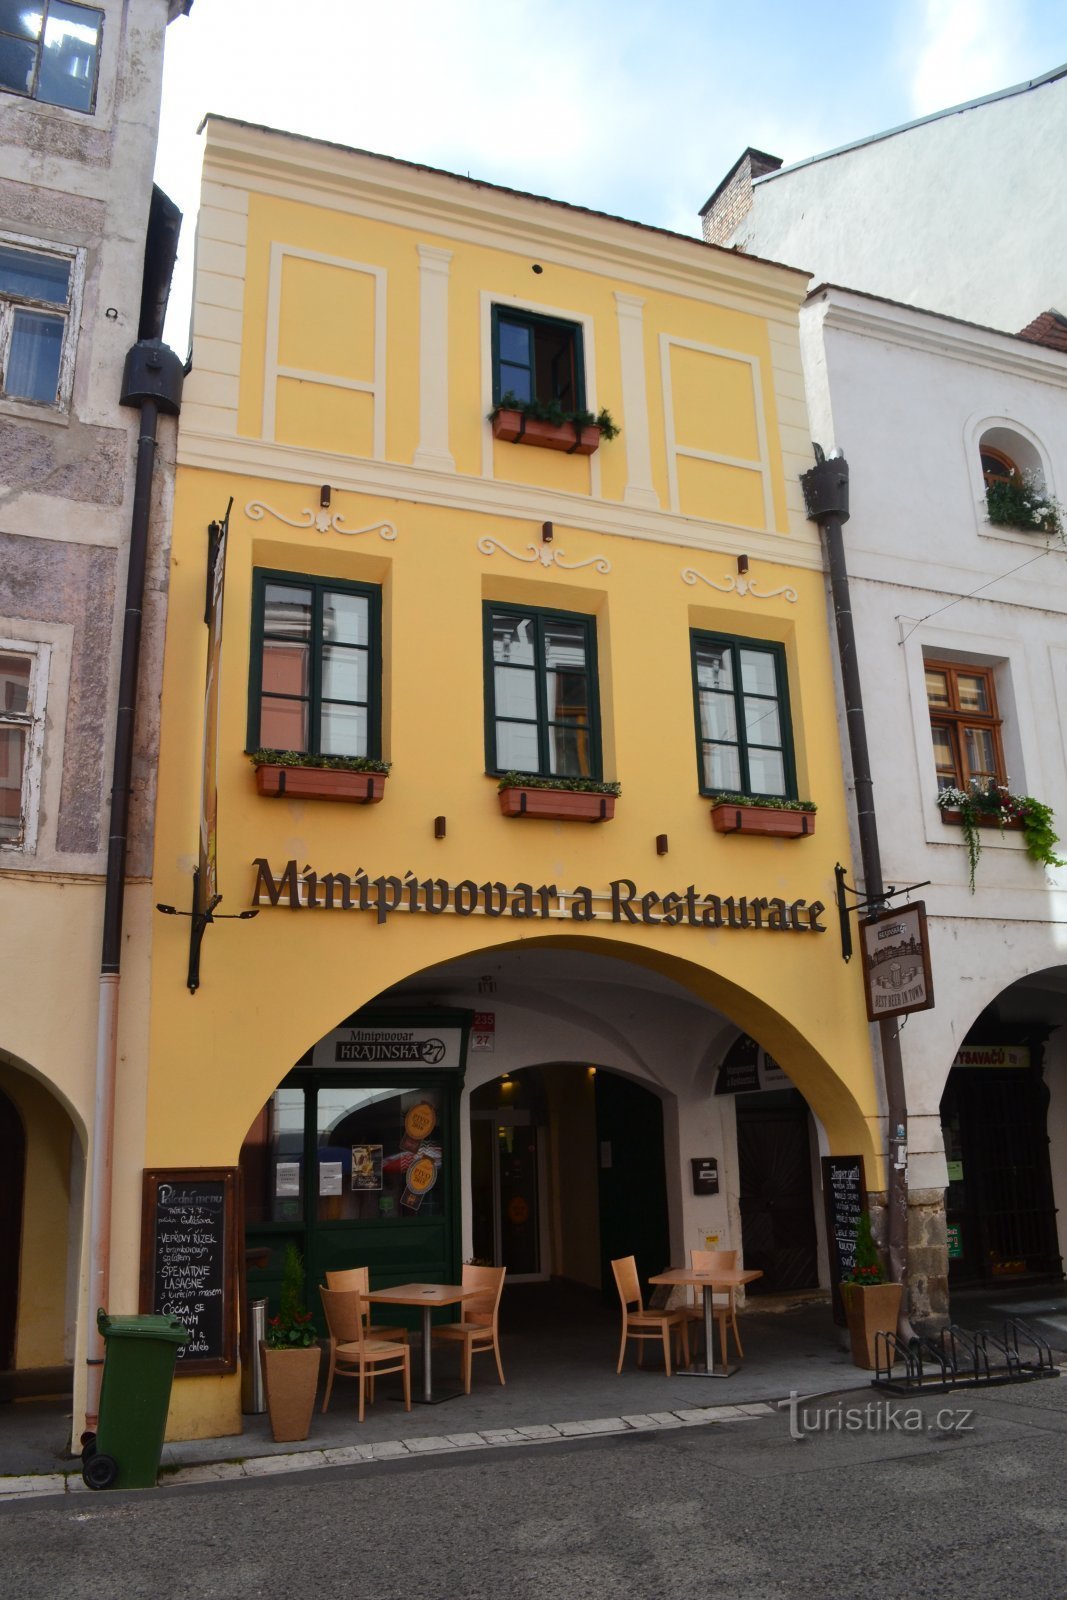 Minibrewery and restaurant